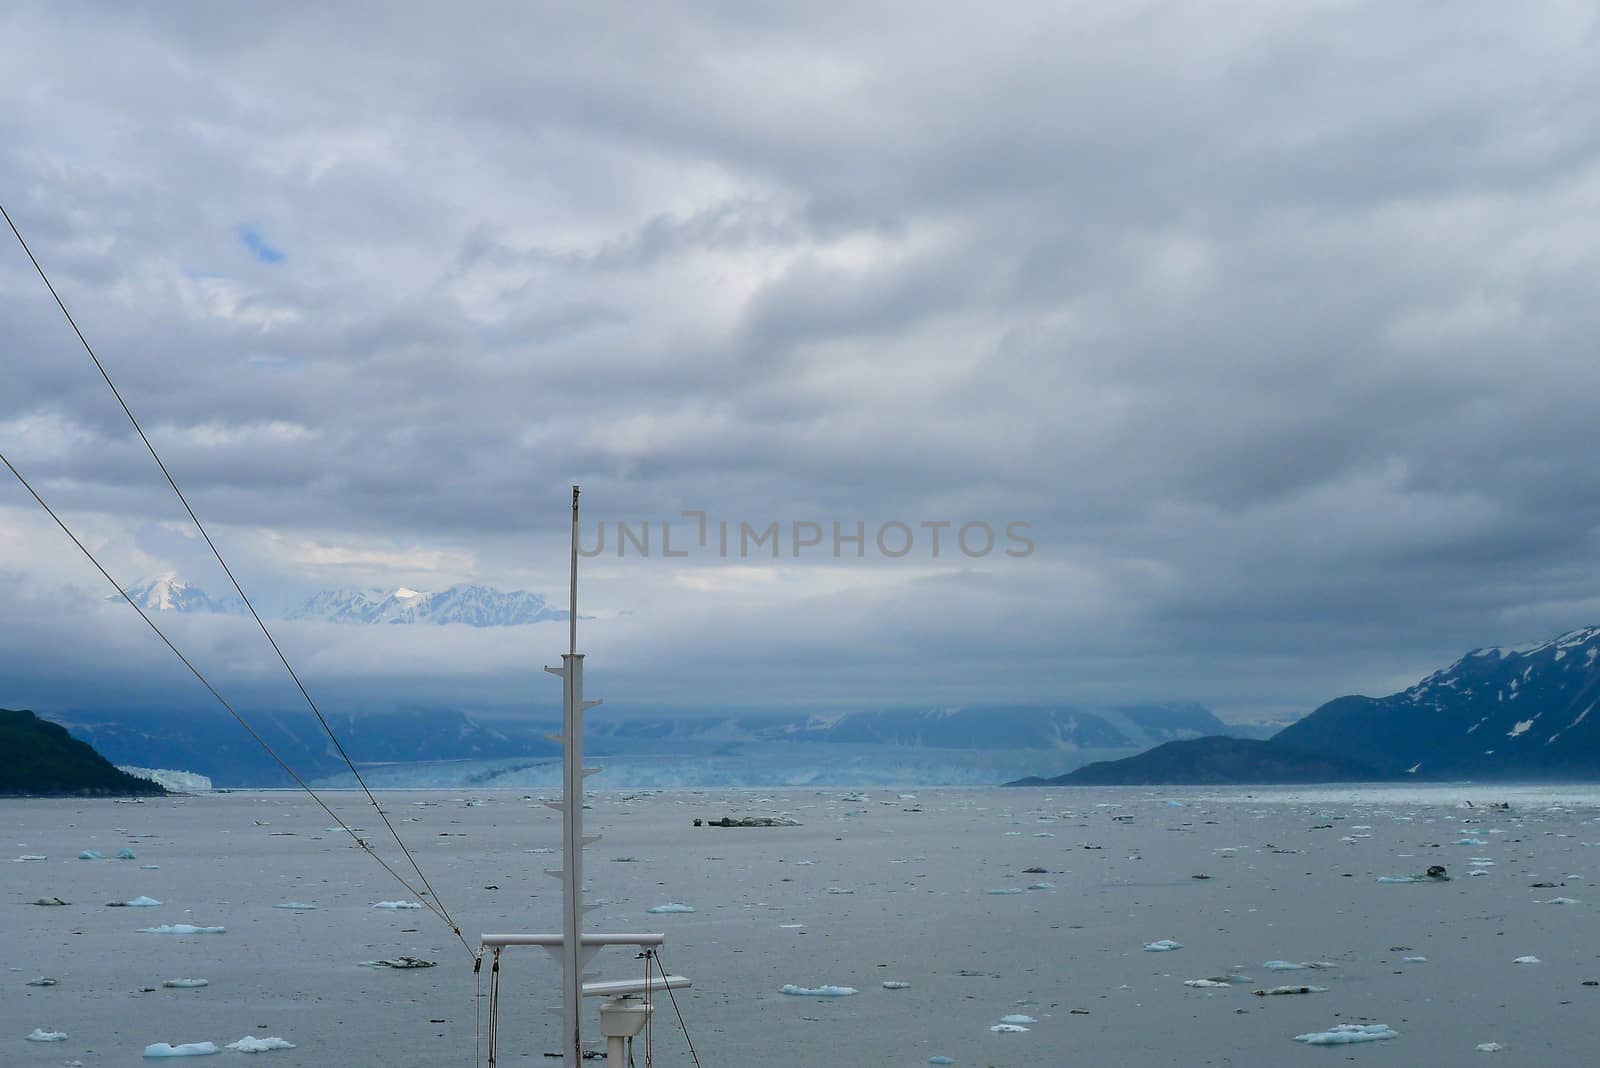 Approaching the Hubbard Glacier in Alaska by chrisukphoto